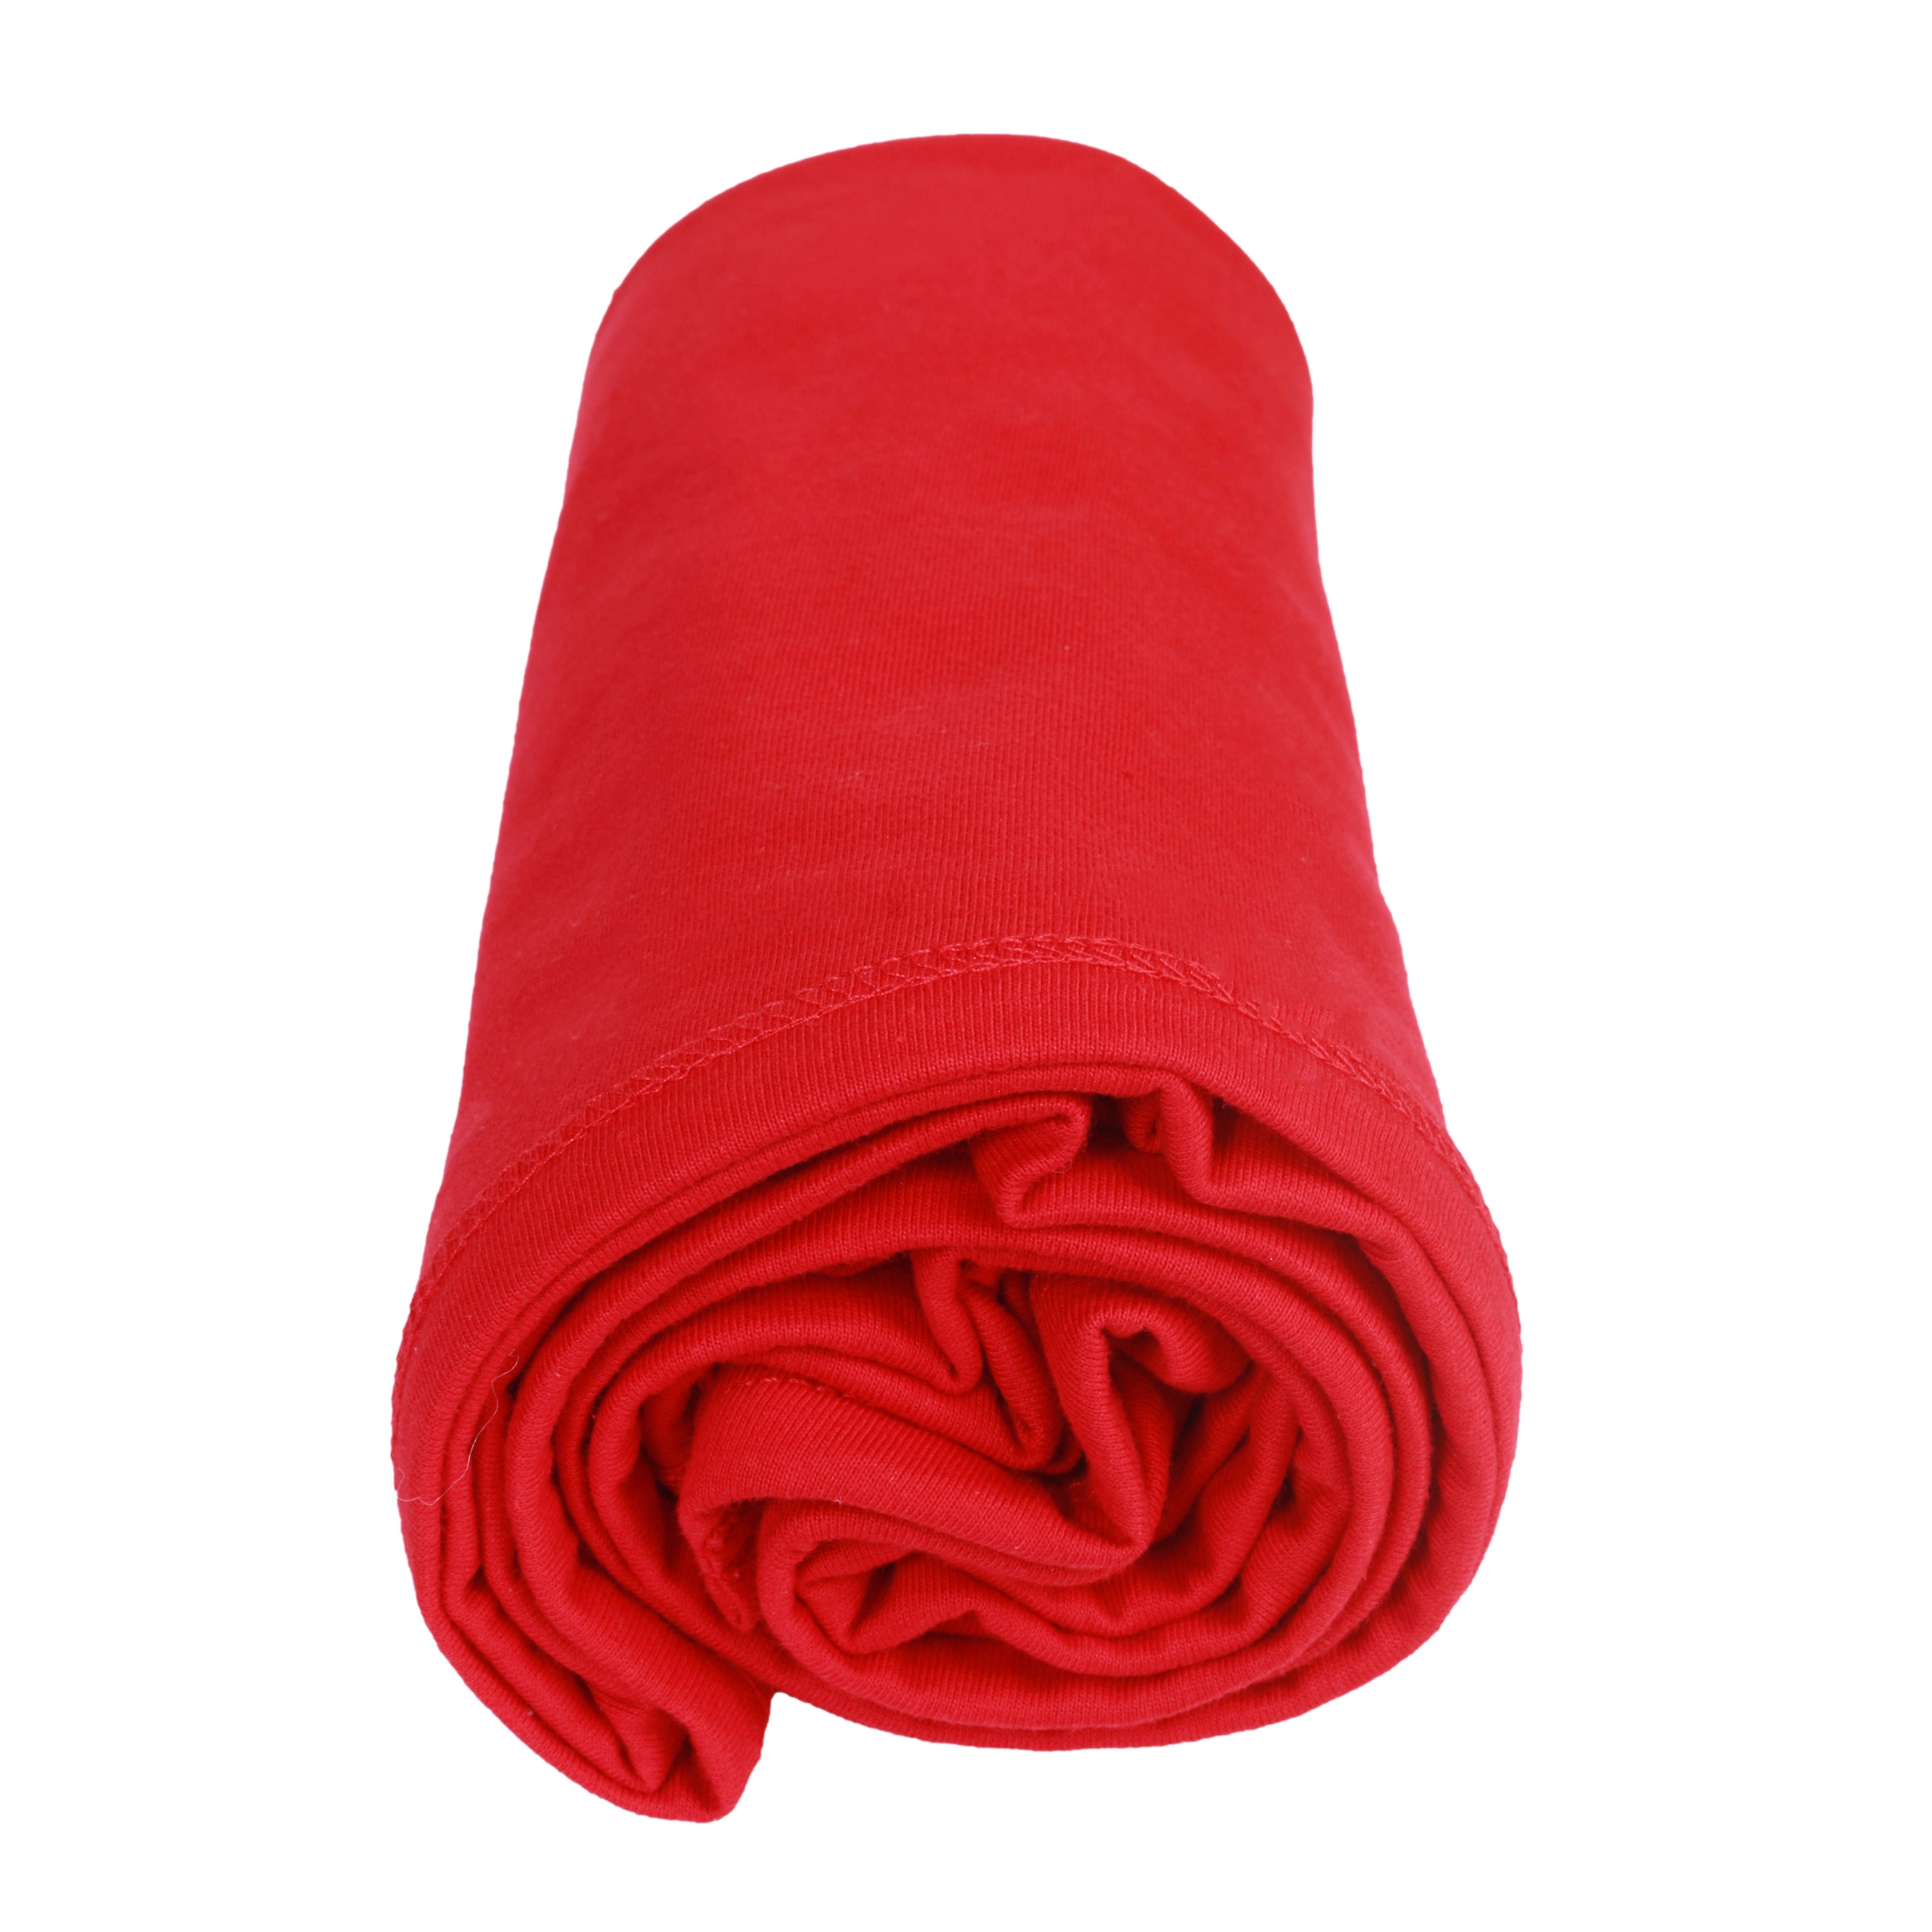 Little By Little 100% Anti Viral, Cotton, Reusable, Anti bacterial & Water Repellent Baby Blanket - Red